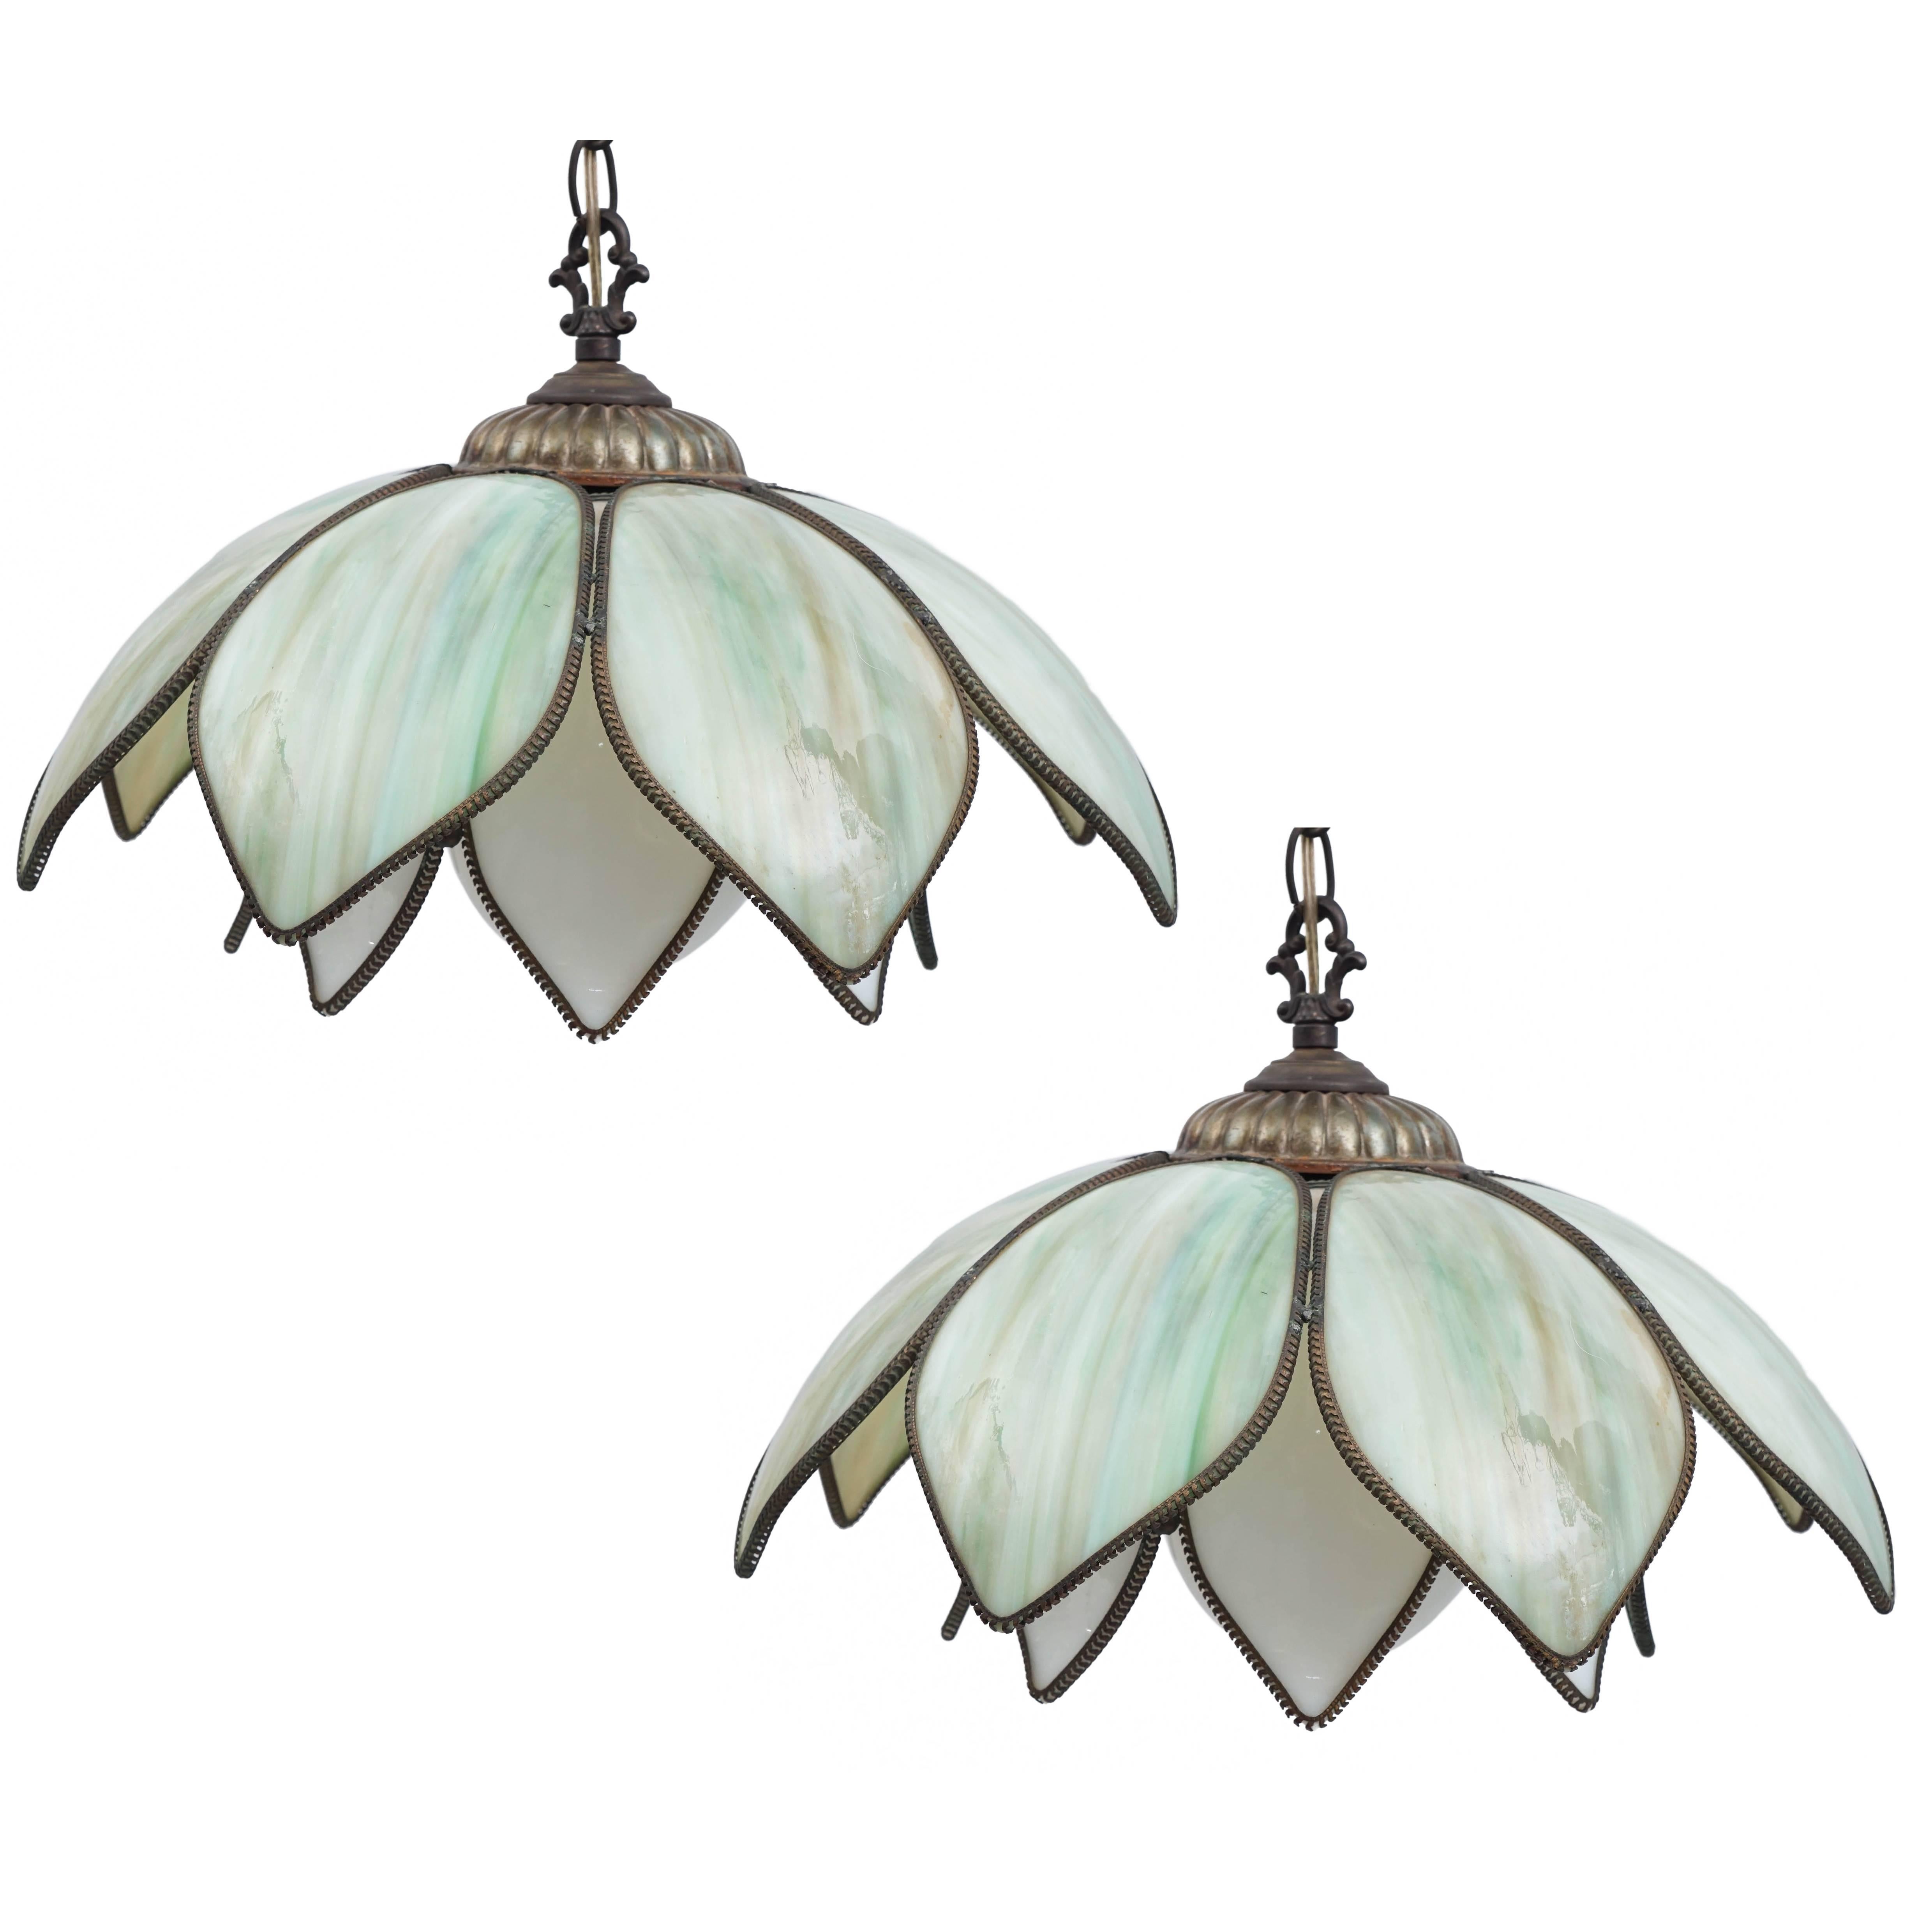 Pair of Midcentury Brass and Glass Hanging Flower Lotus Flower Light For Sale